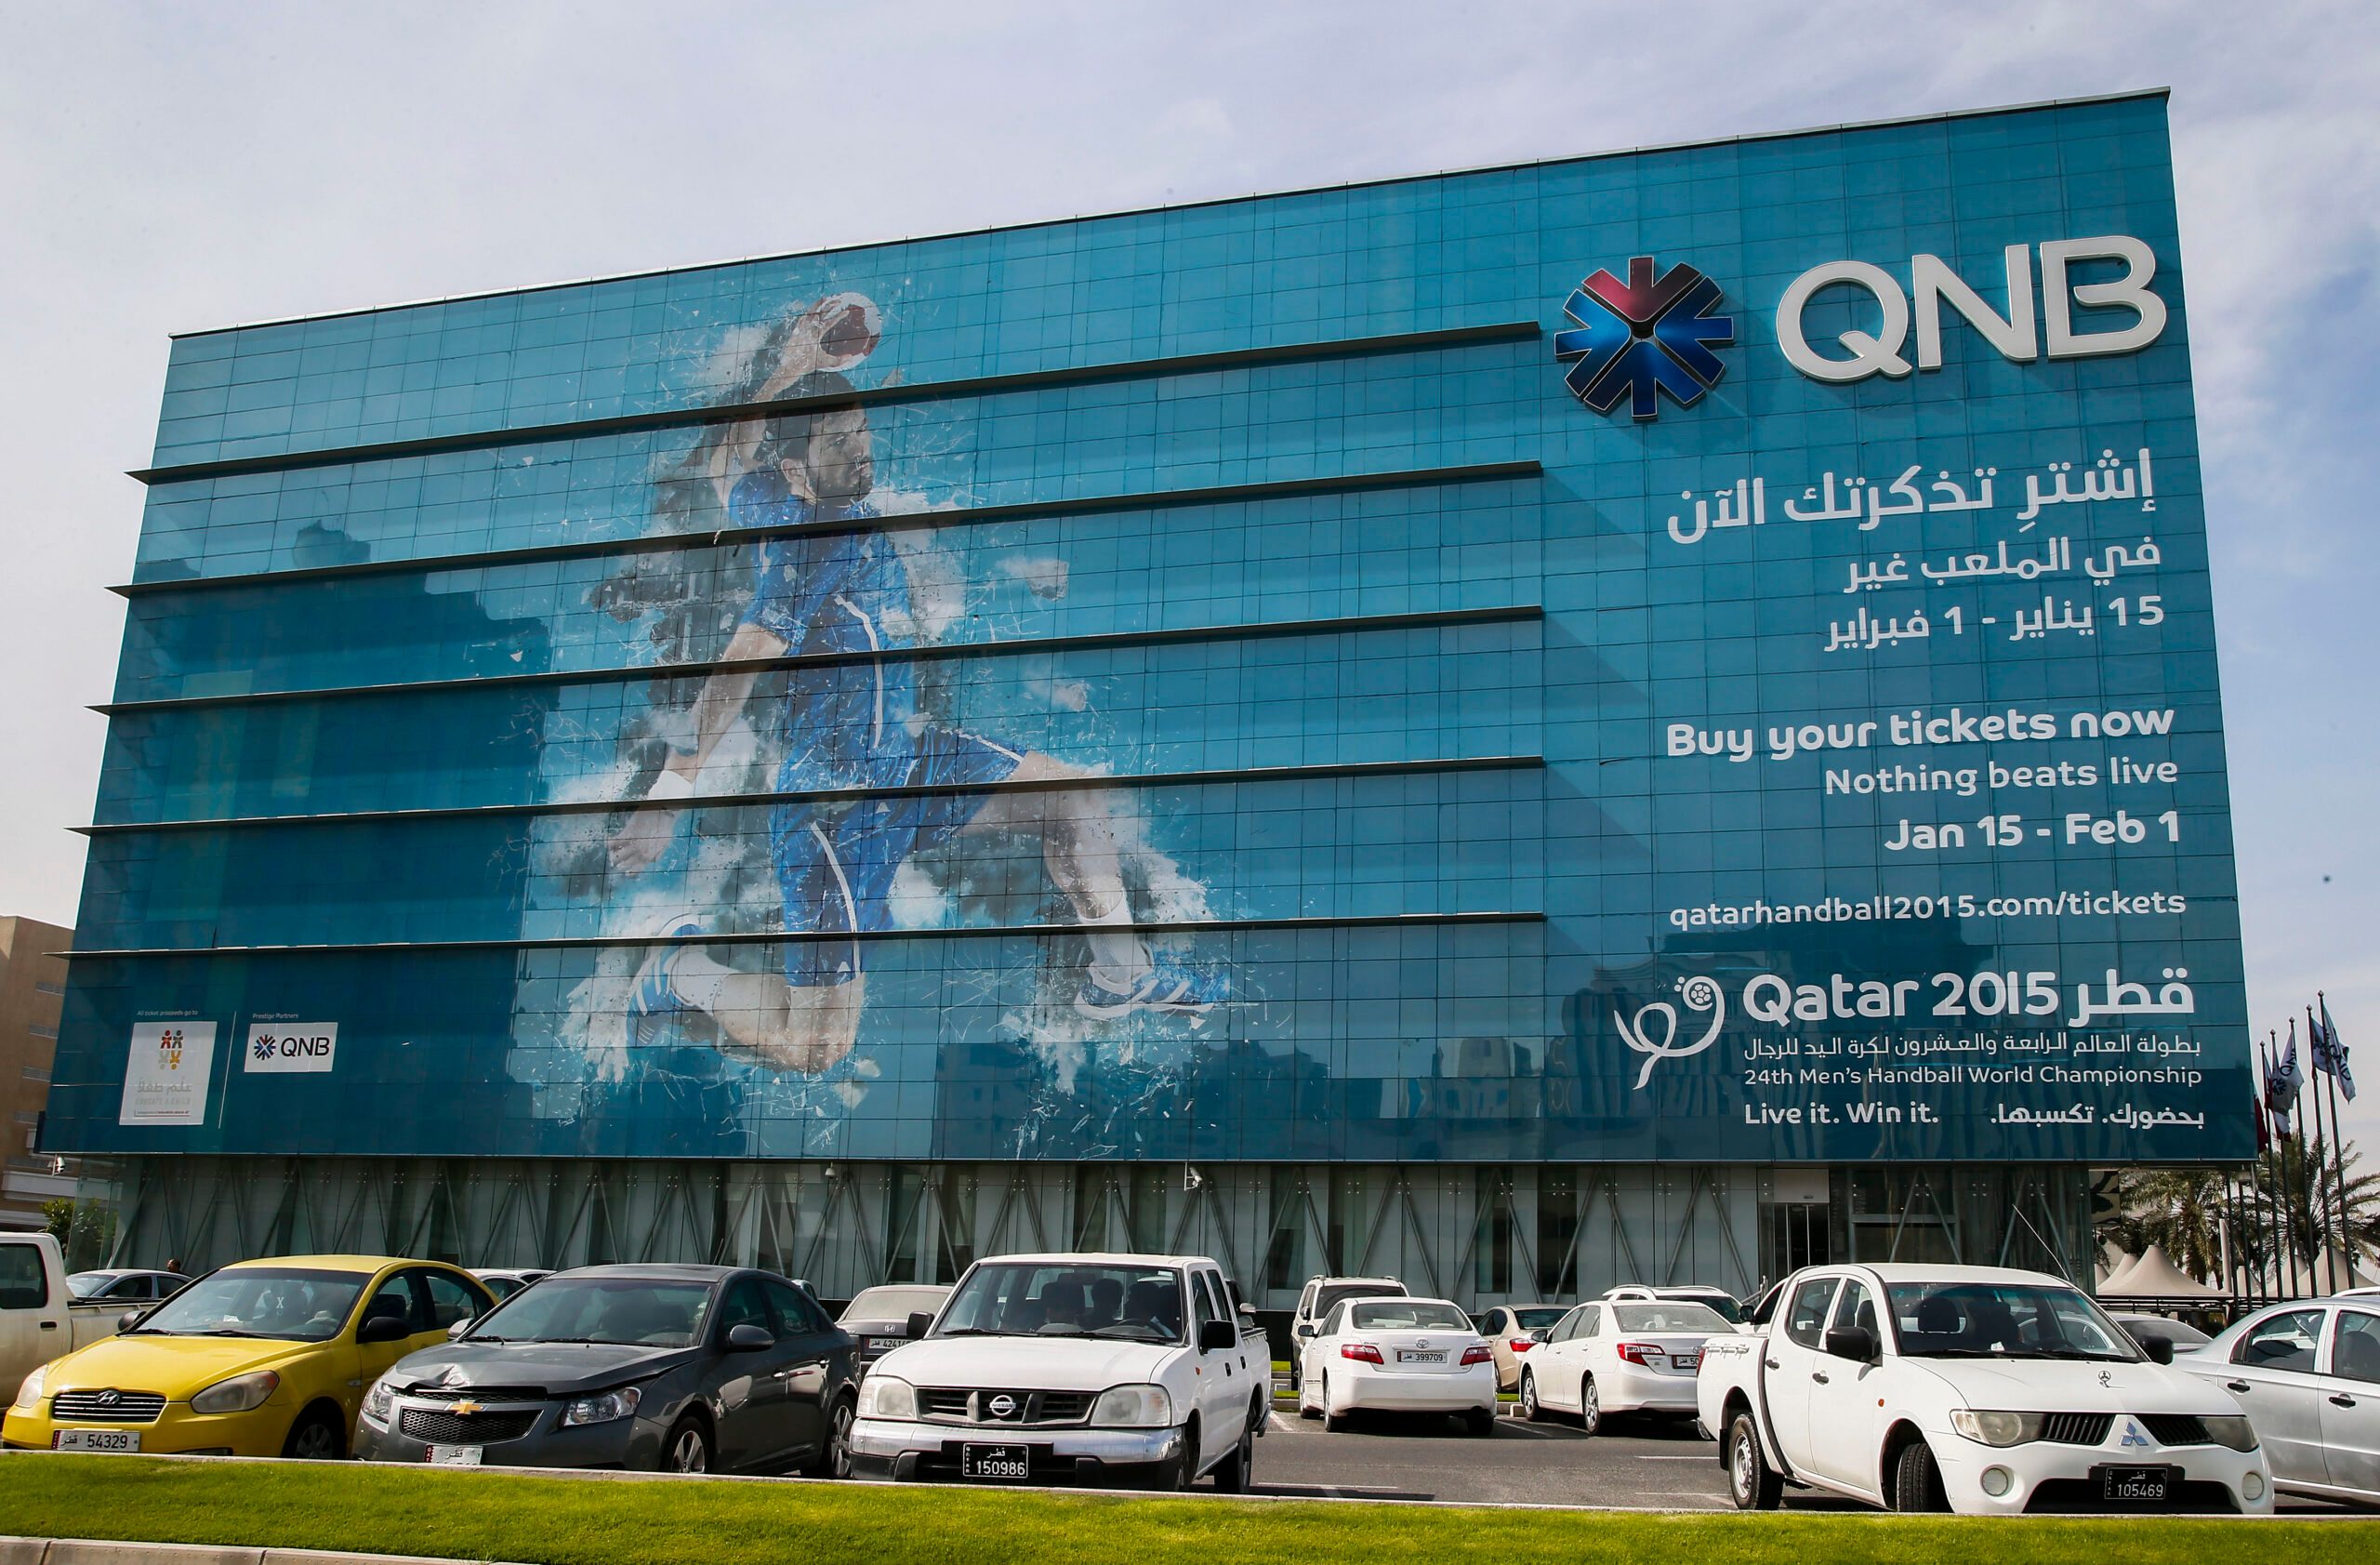 Qatar National Bank says systems ‘secure’ after hack attack